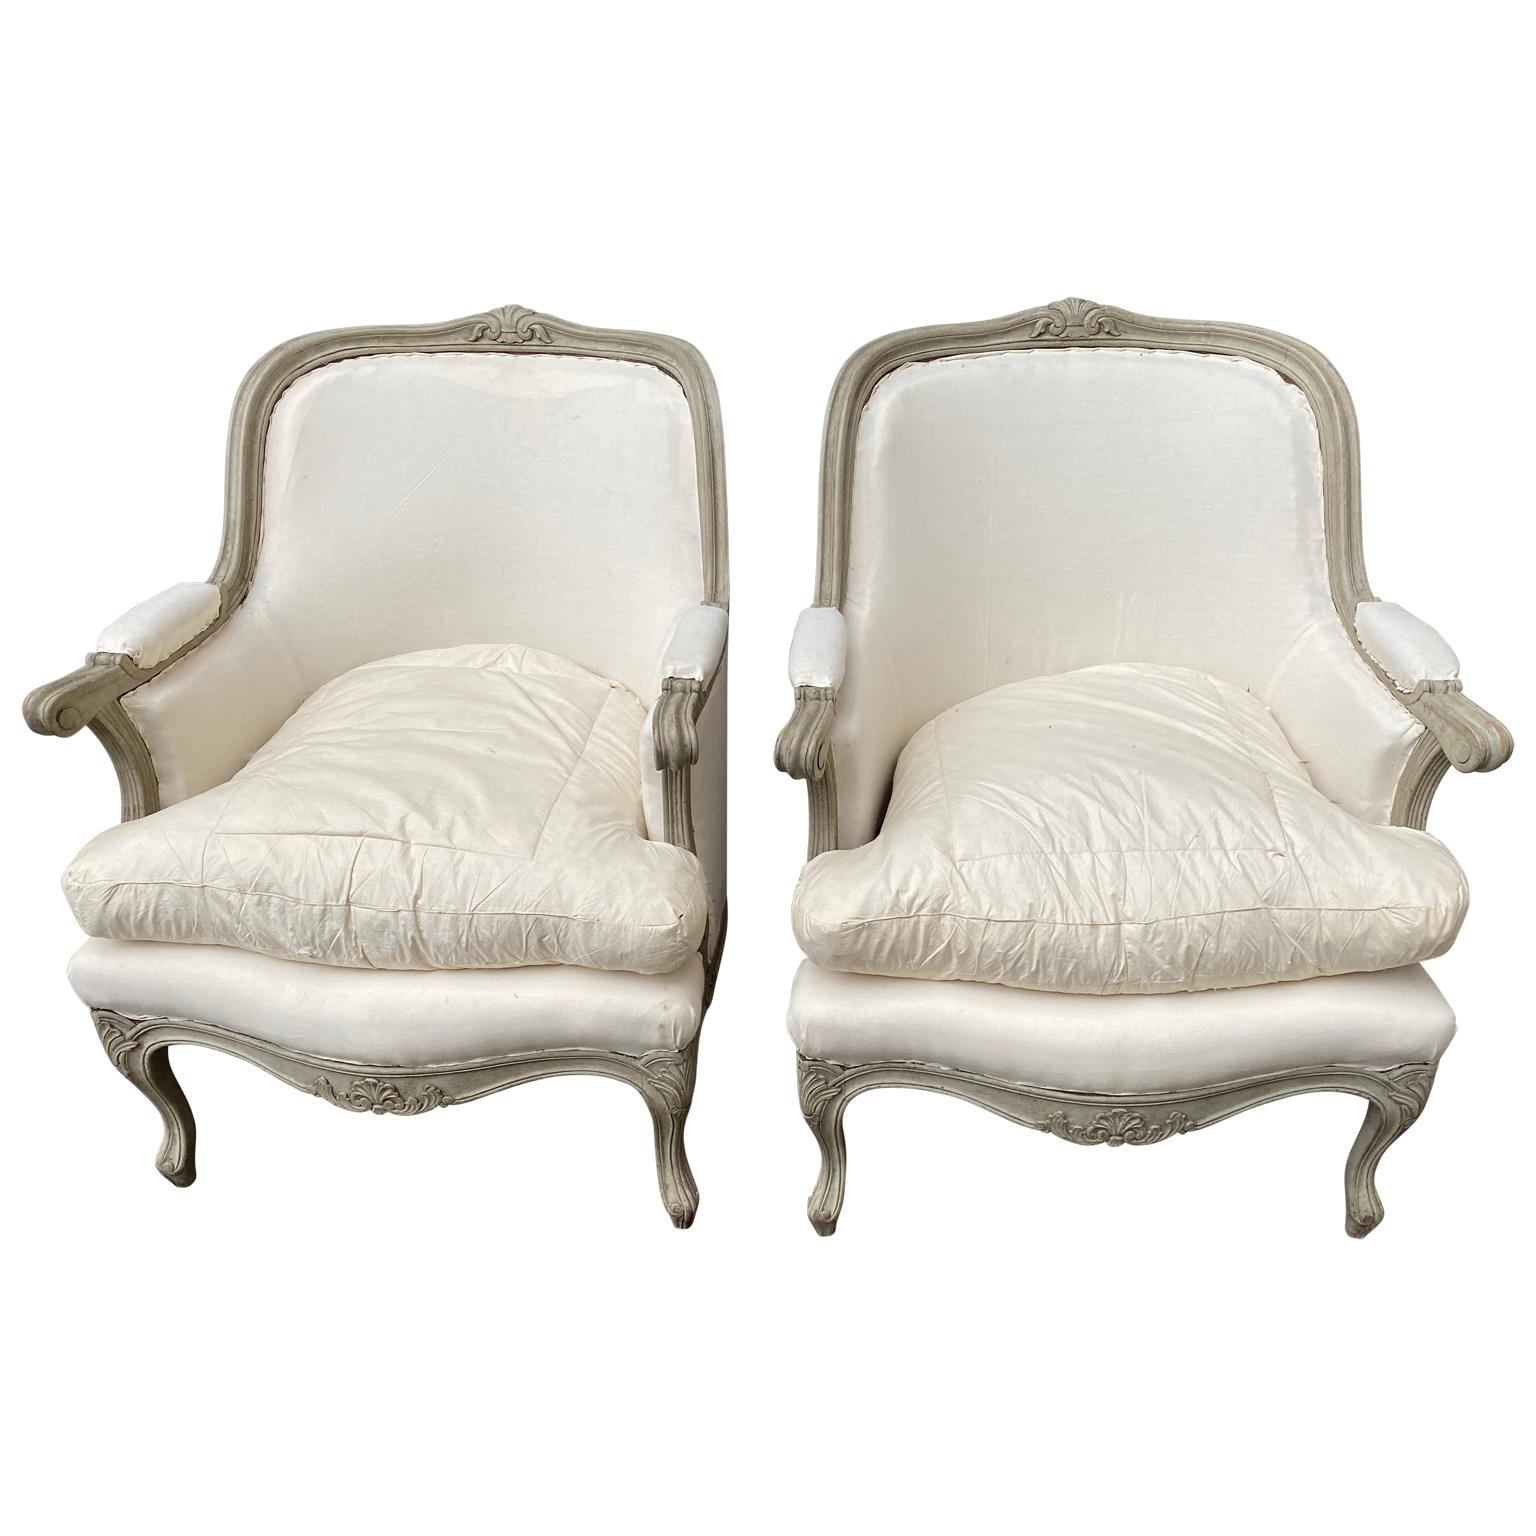 Rococo Pair of Swedish Grey Painted Bergere Armchairs